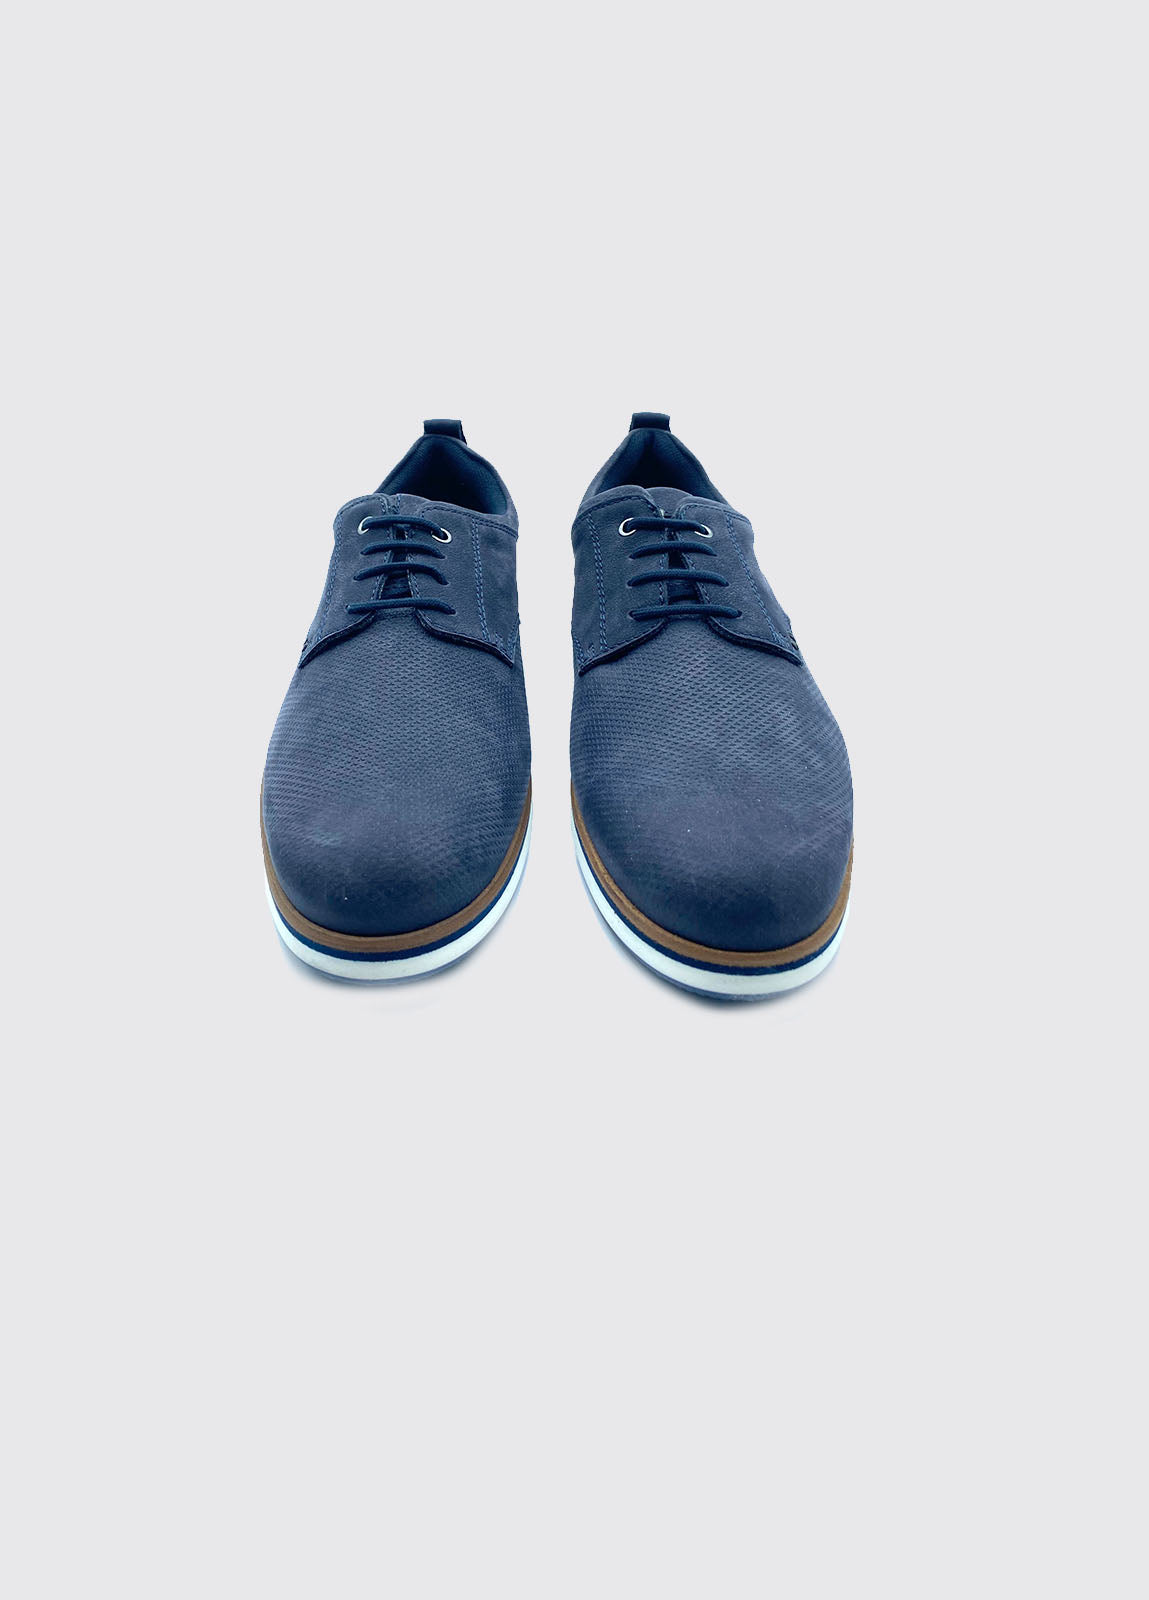 Stafford Navy Mens Shoe-Front view